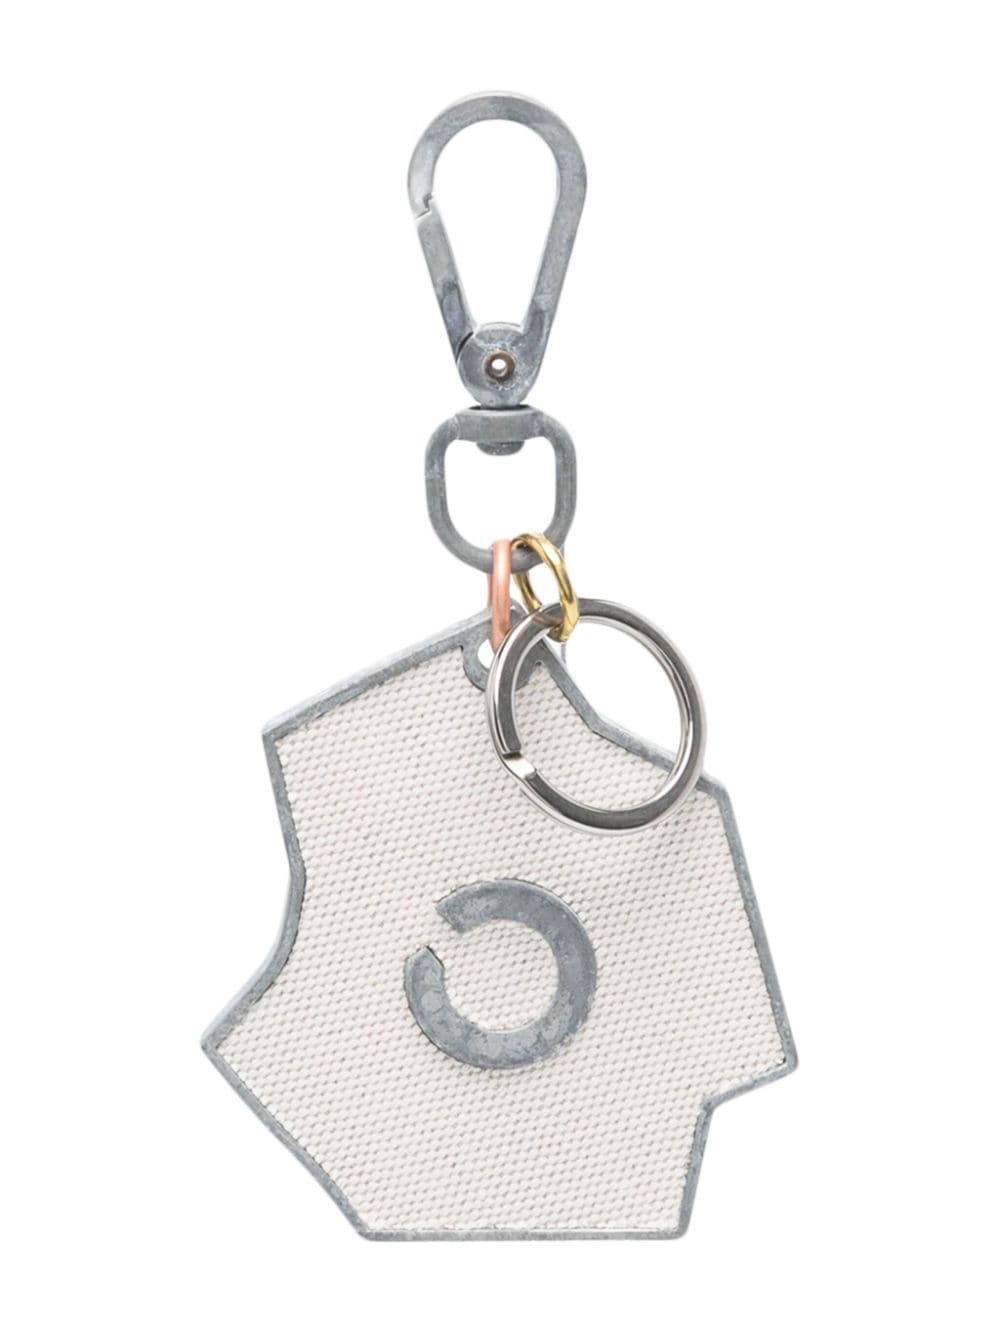 Objects Iv Life Objects Key Charm In Grey